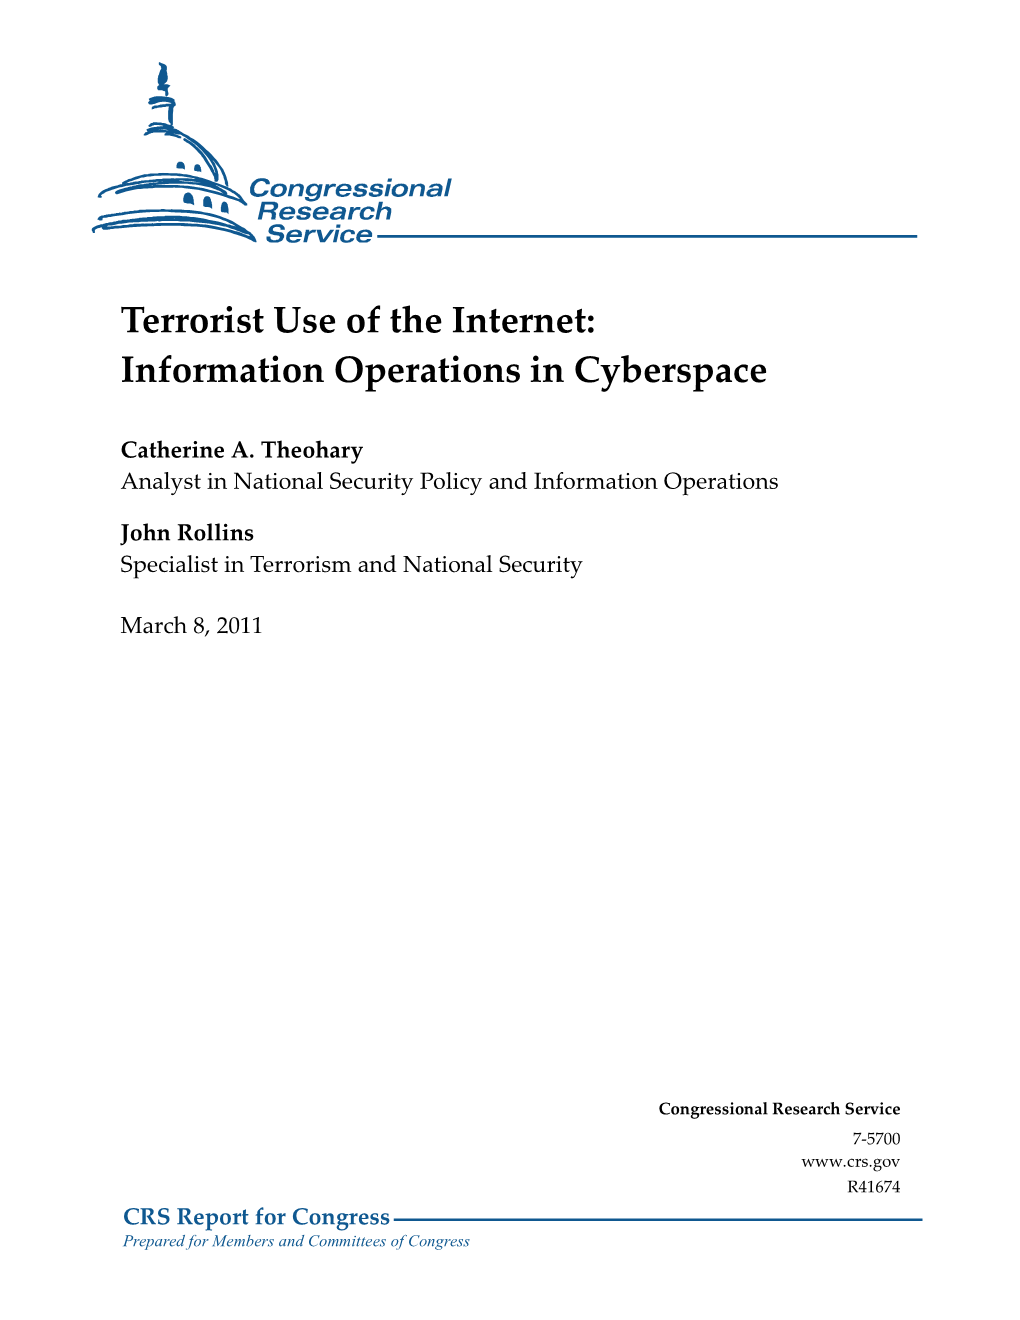 Terrorist Use of the Internet: Information Operations in Cyberspace